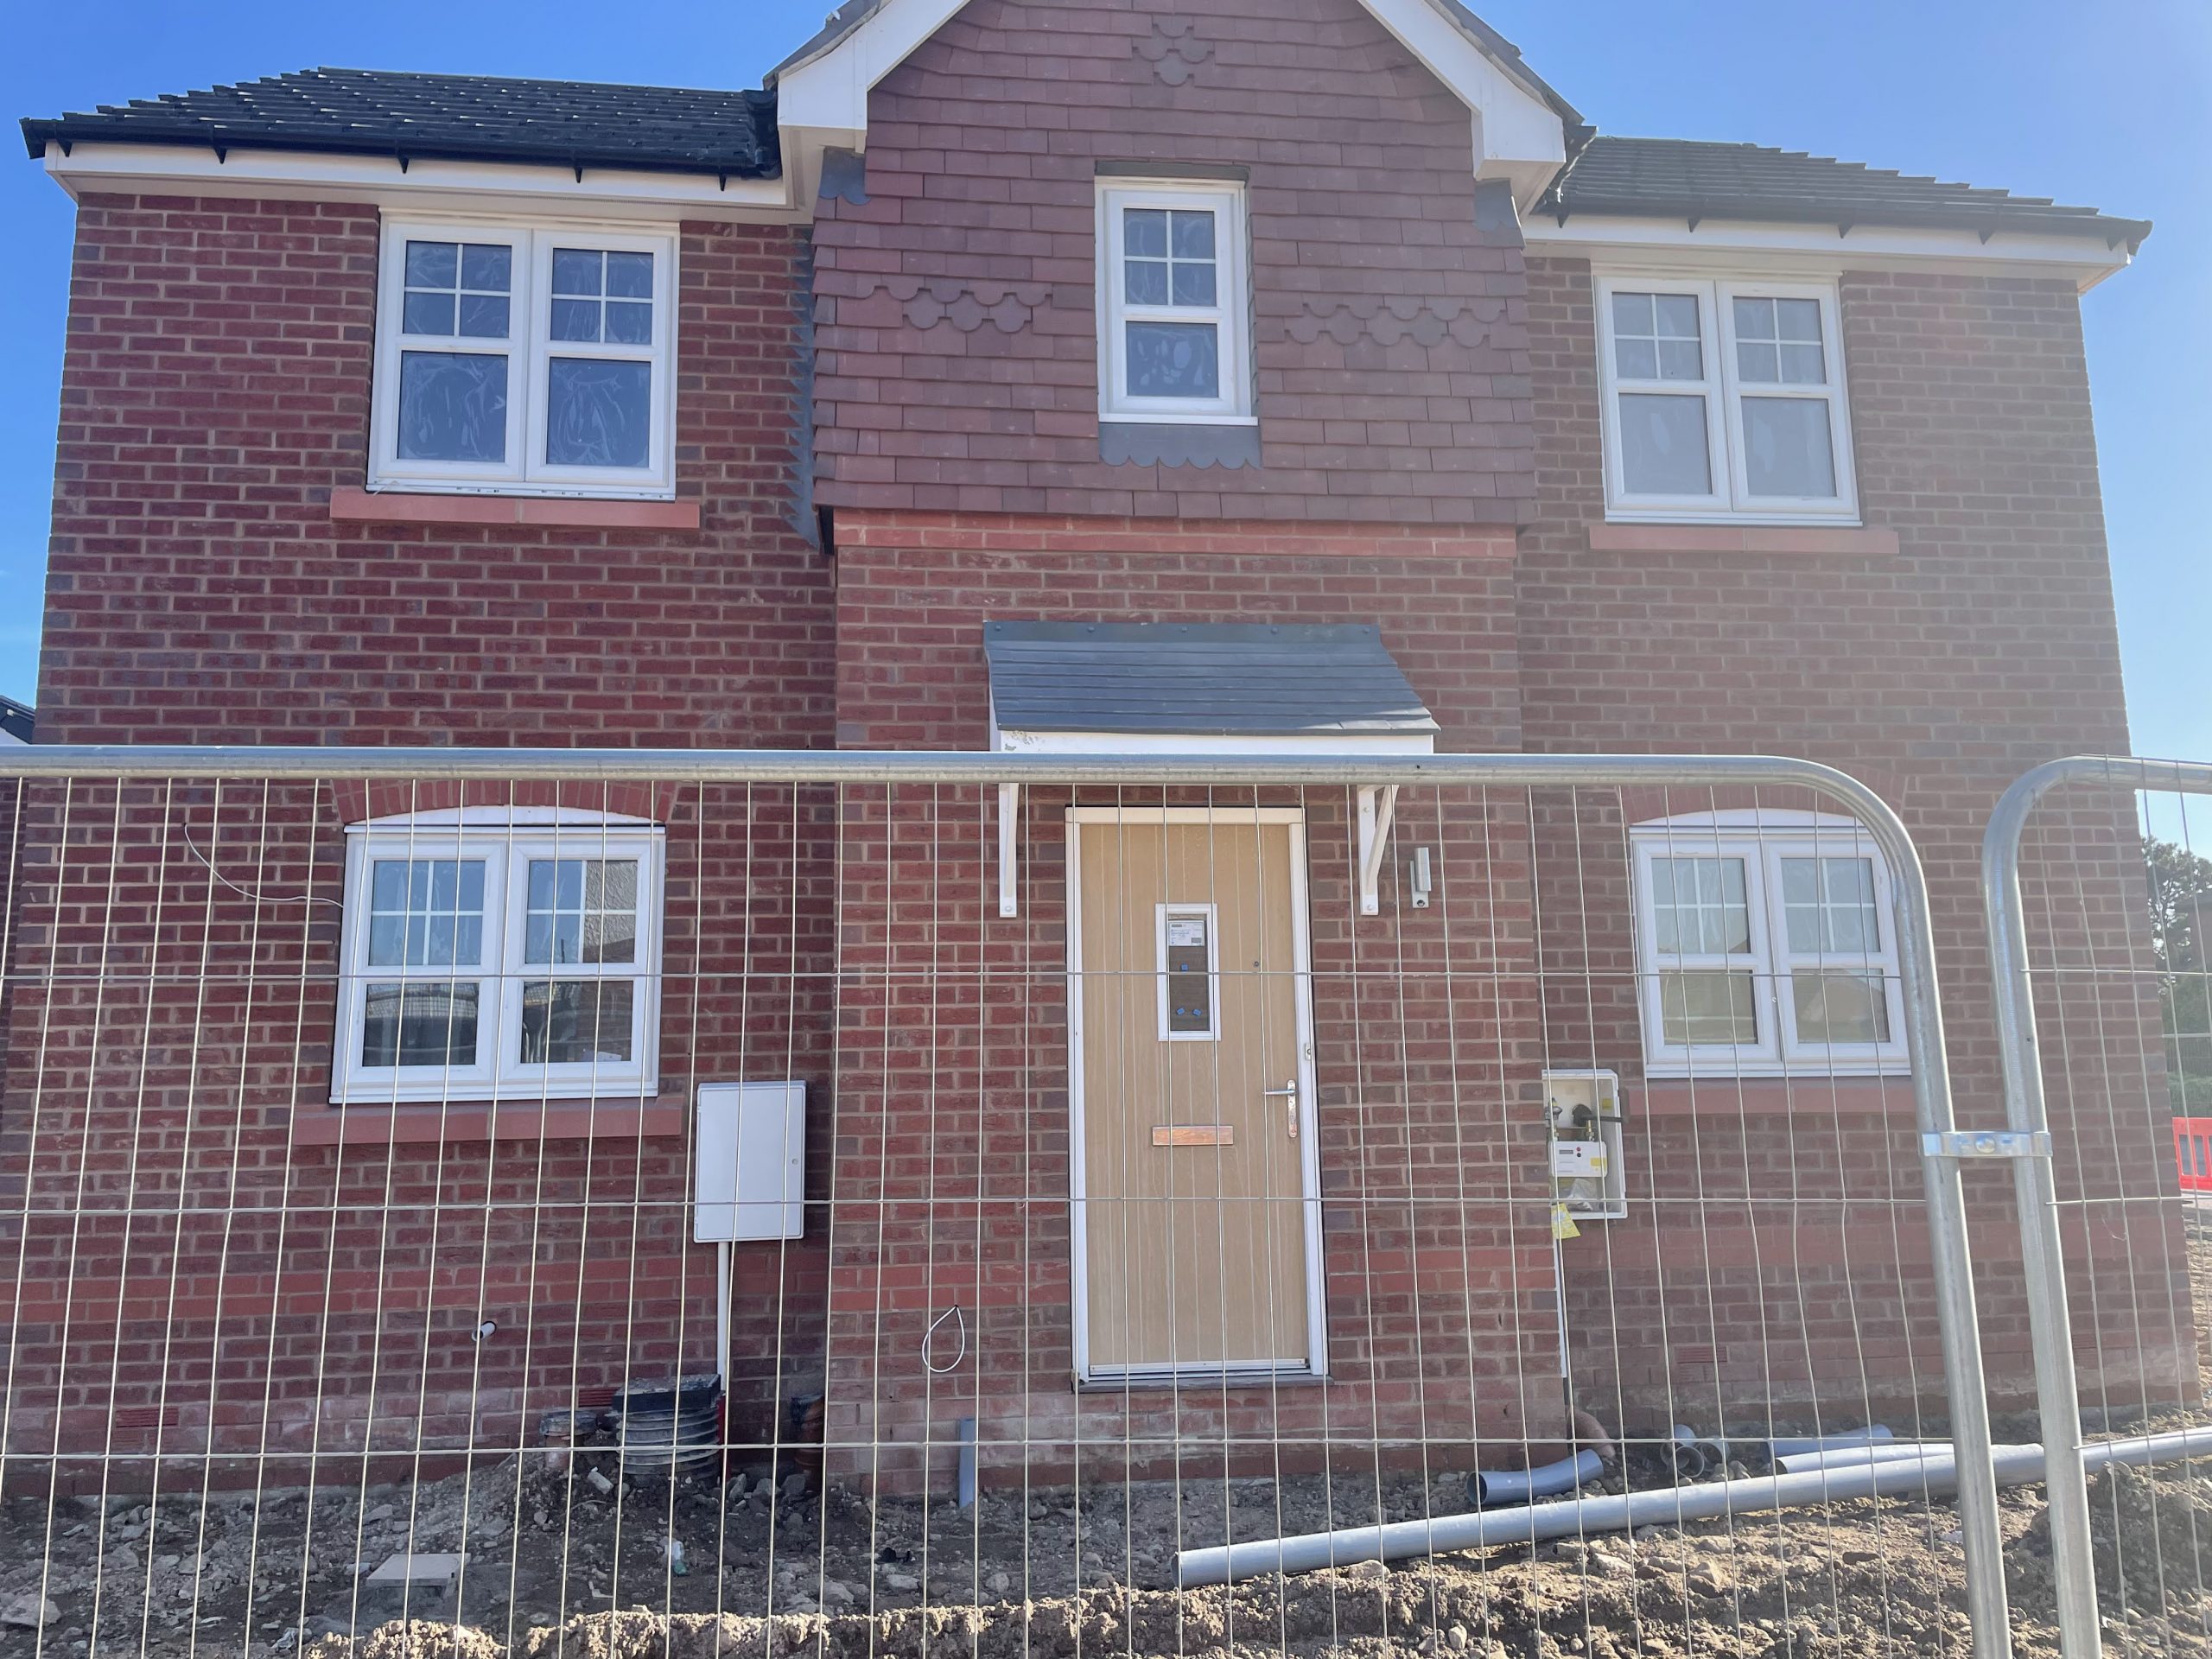 a new build detached home, with a wood coloured door and metal fencing around it